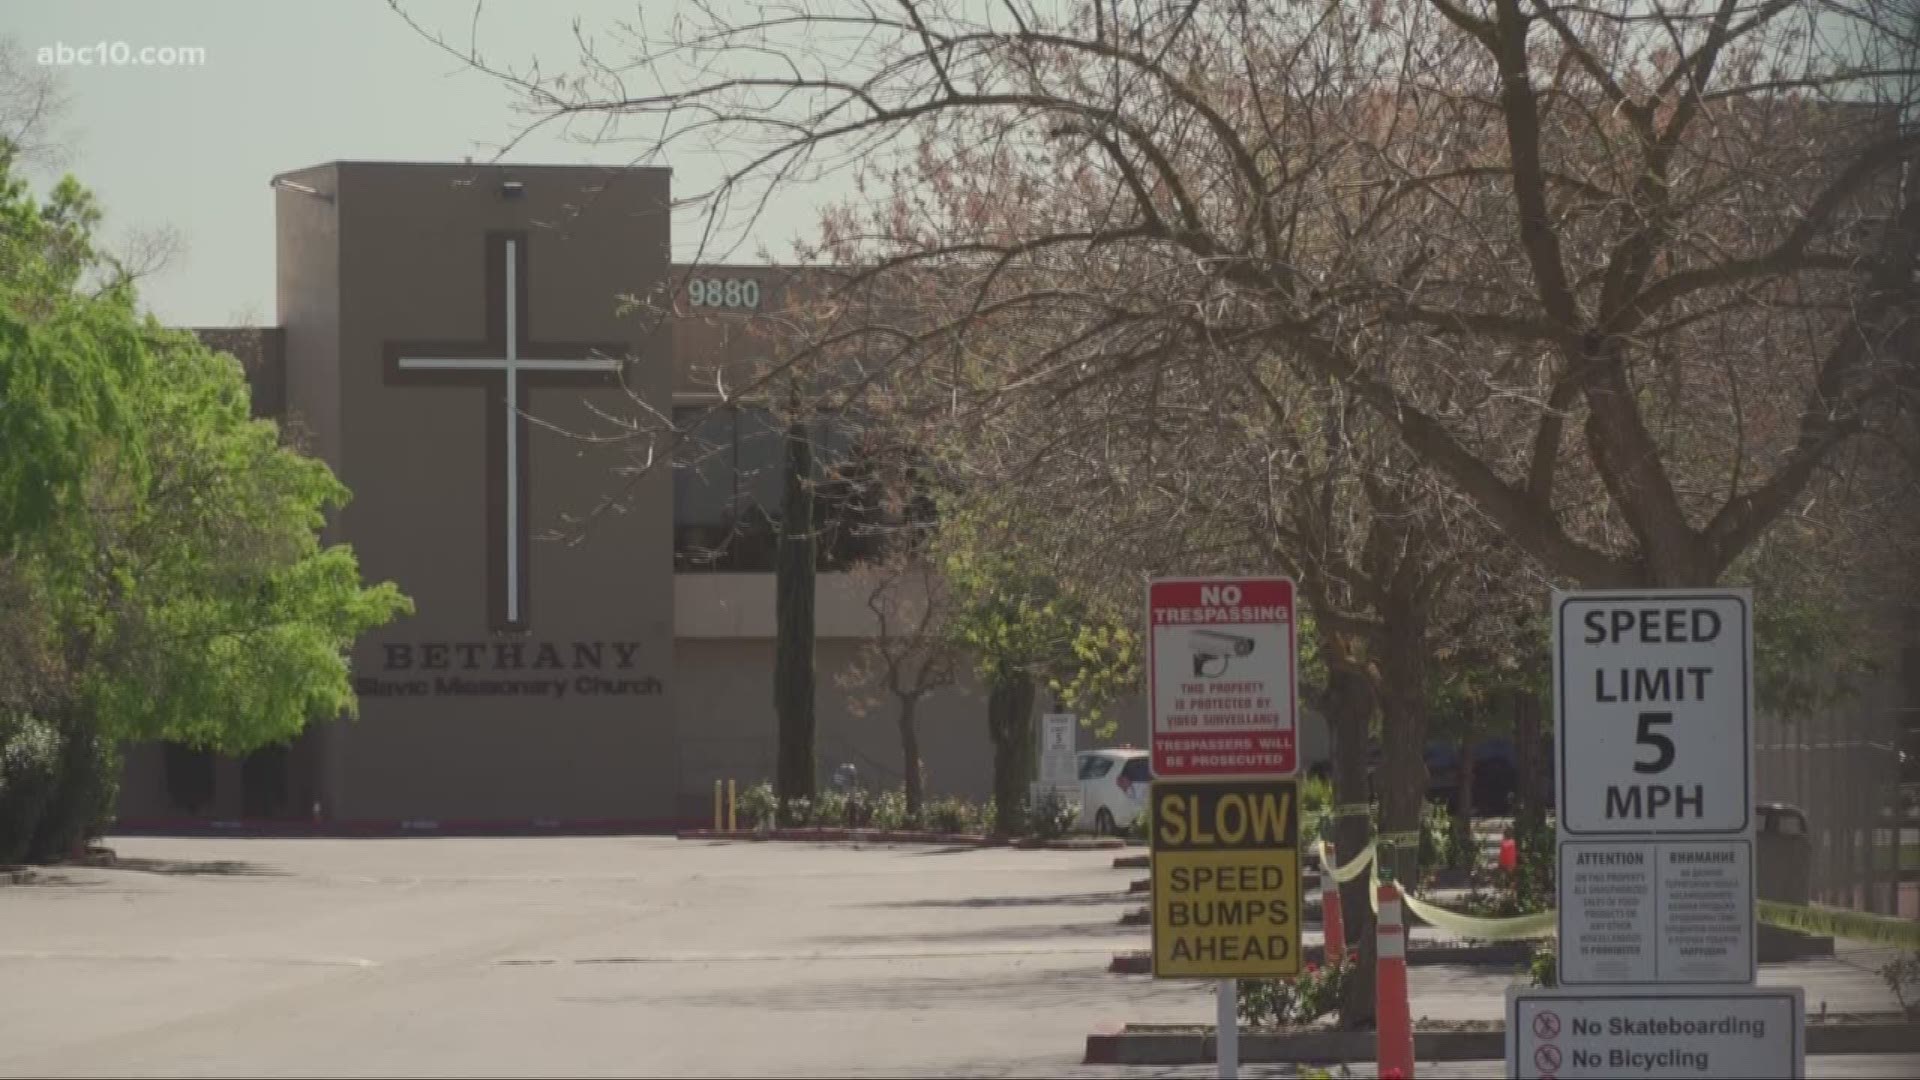 Health officals say church gatherings responsible for 30 percent of coronavirus cases in the Sacramento area.